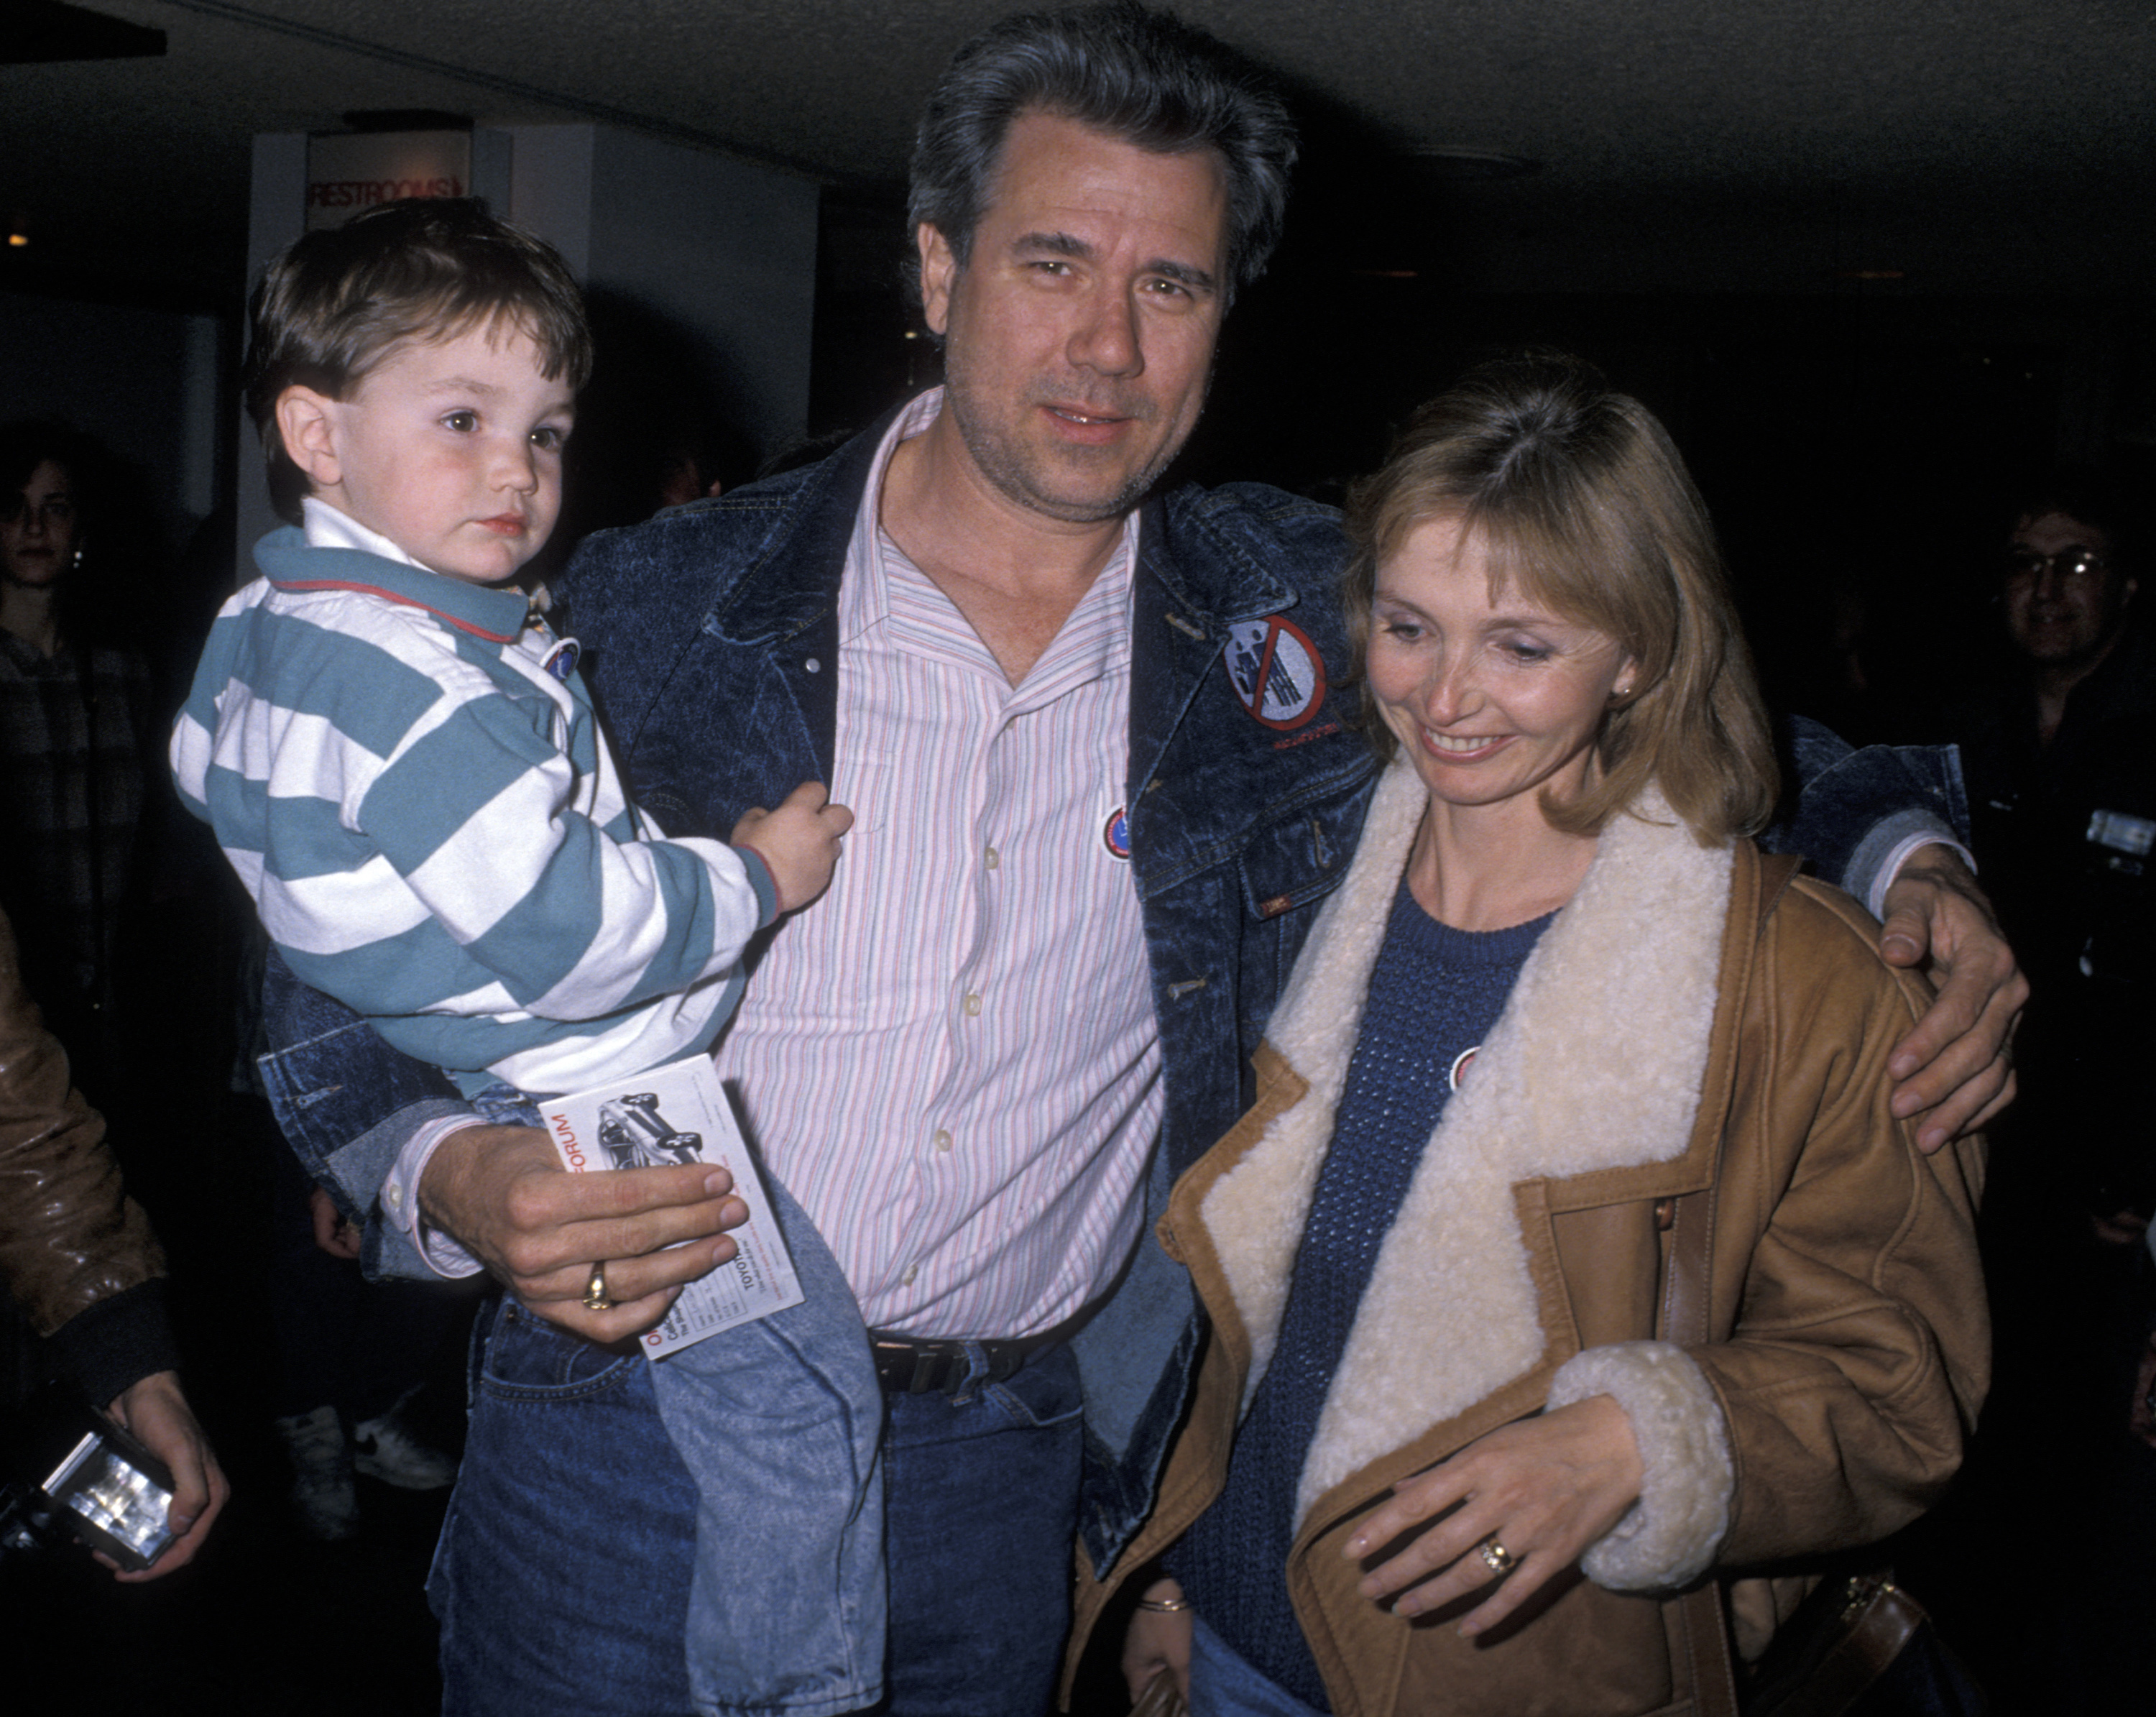 John Larroquette, Elizabeth Cookson, and their son, Jonathan, at the Moscow Circus opening in 1990. | Source: Getty Images